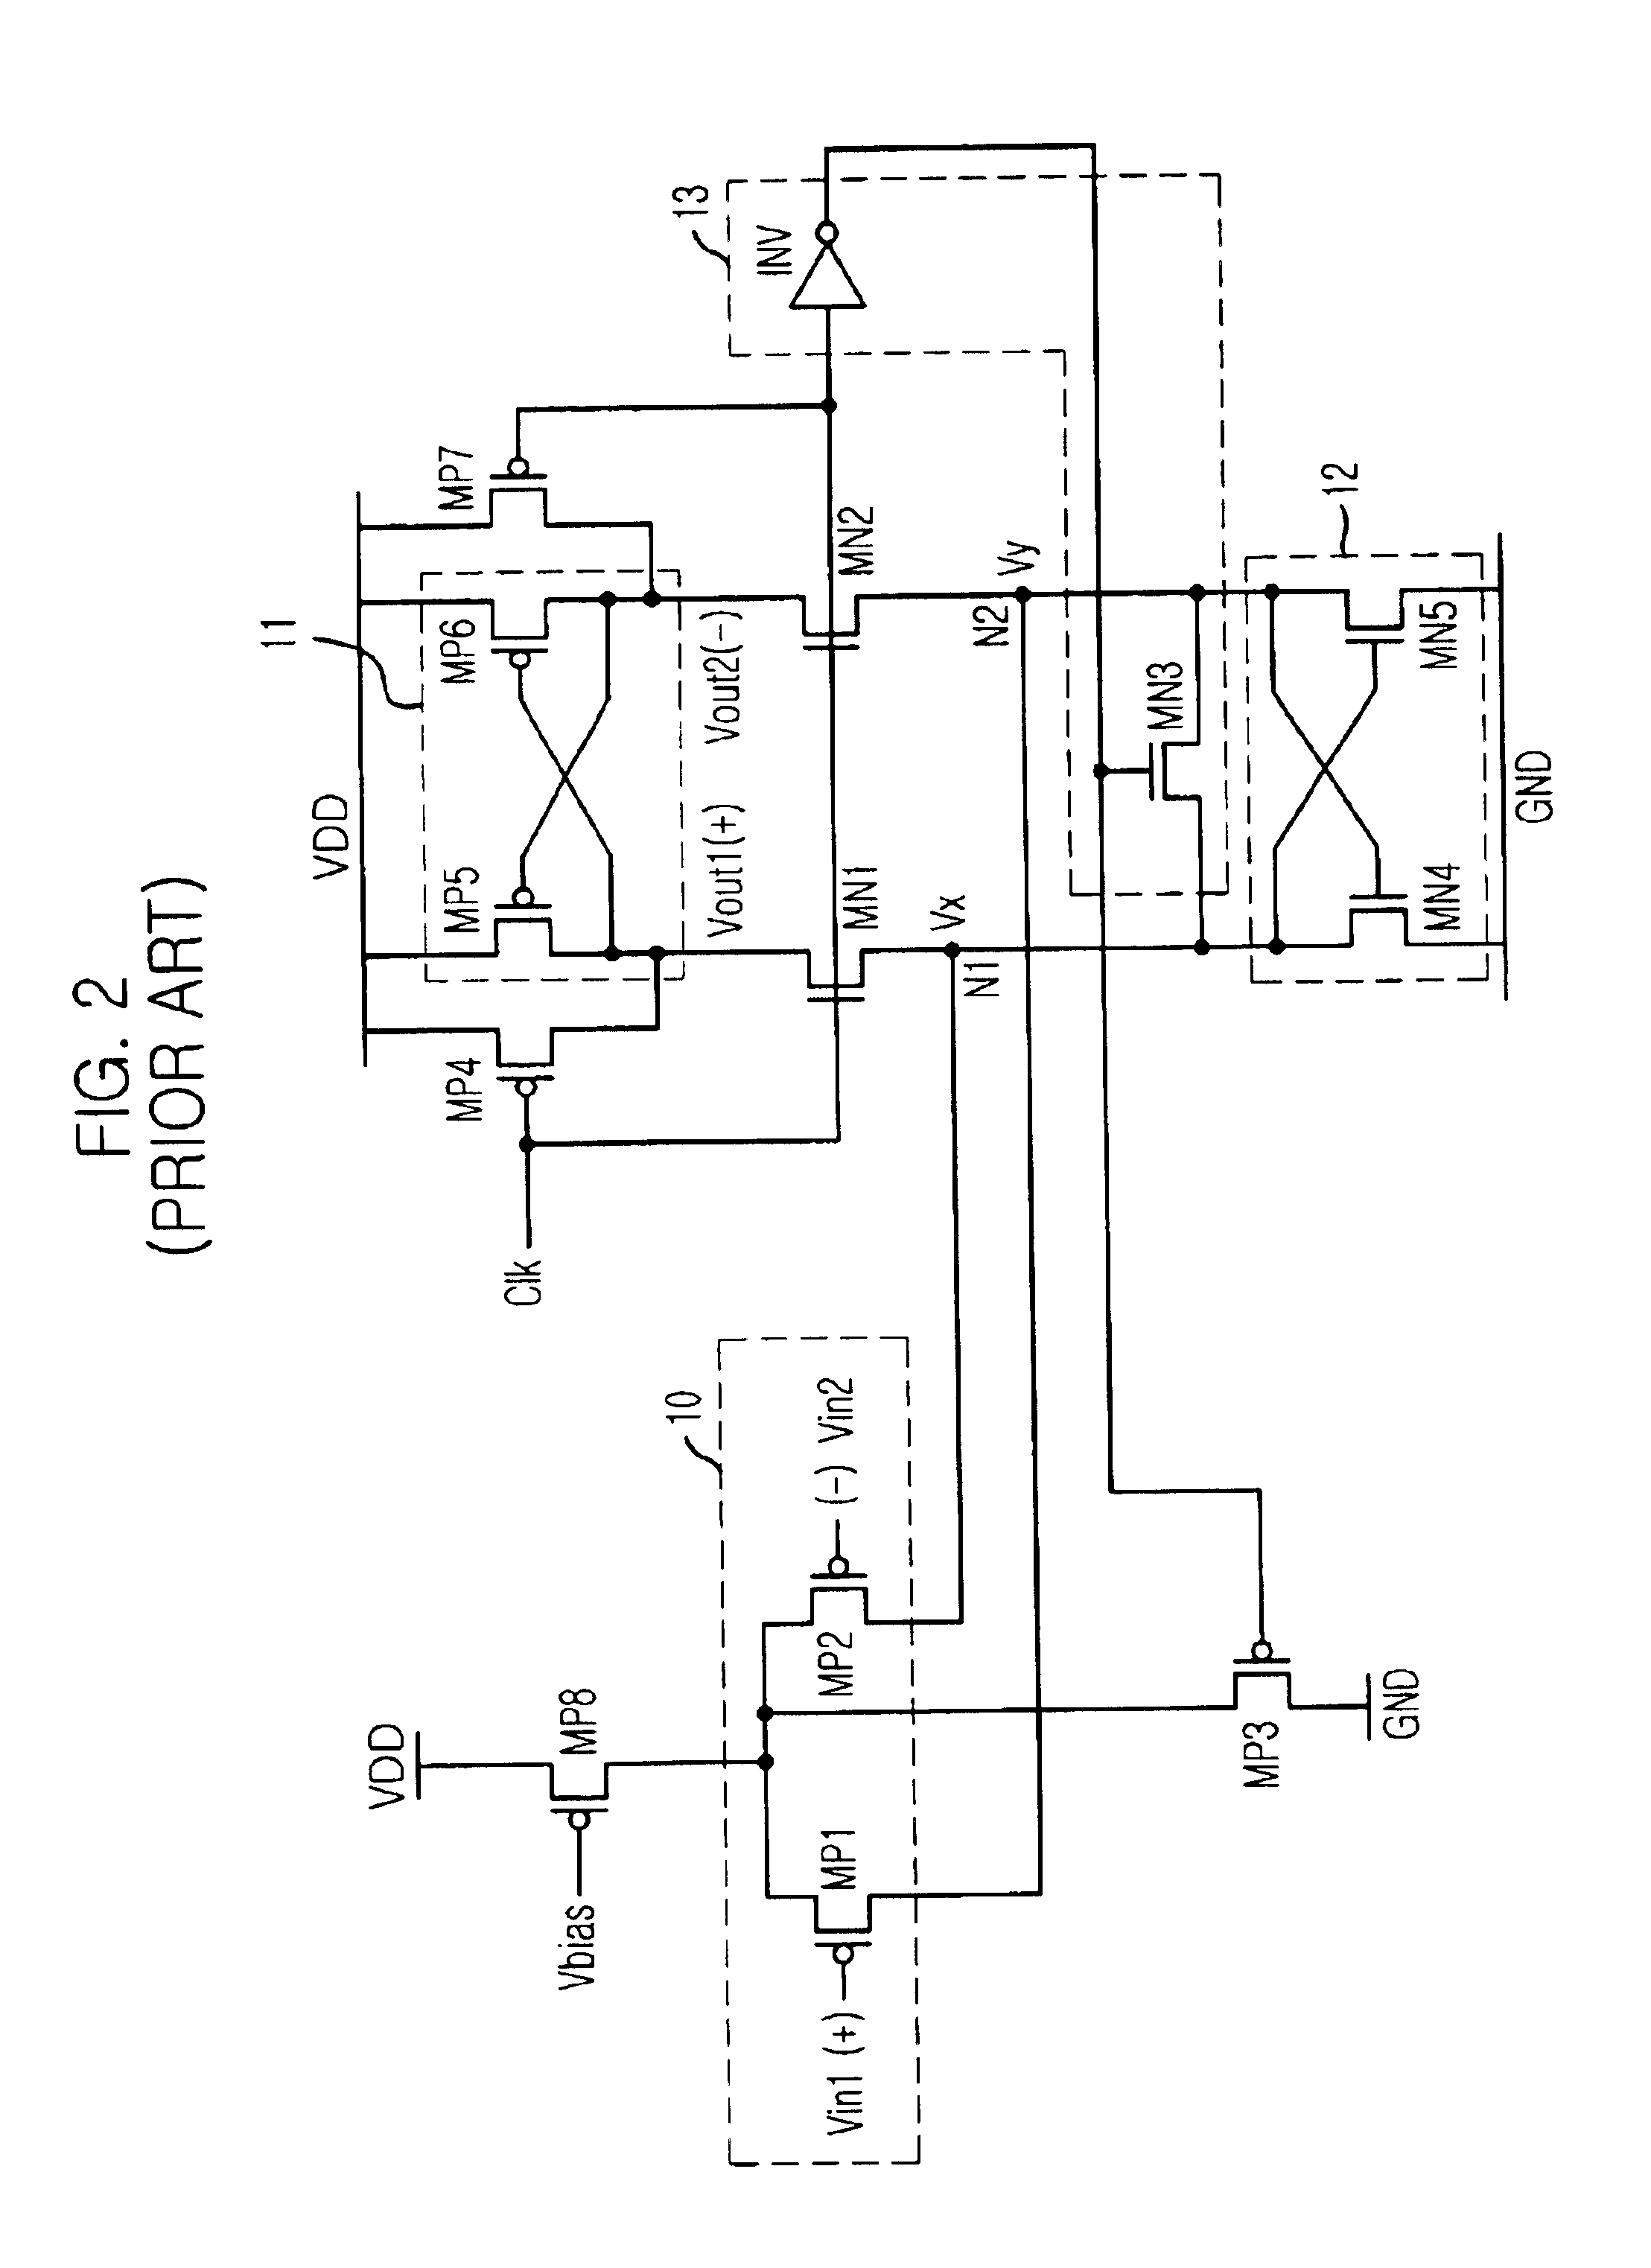 Comparison apparatus operated at a low voltage